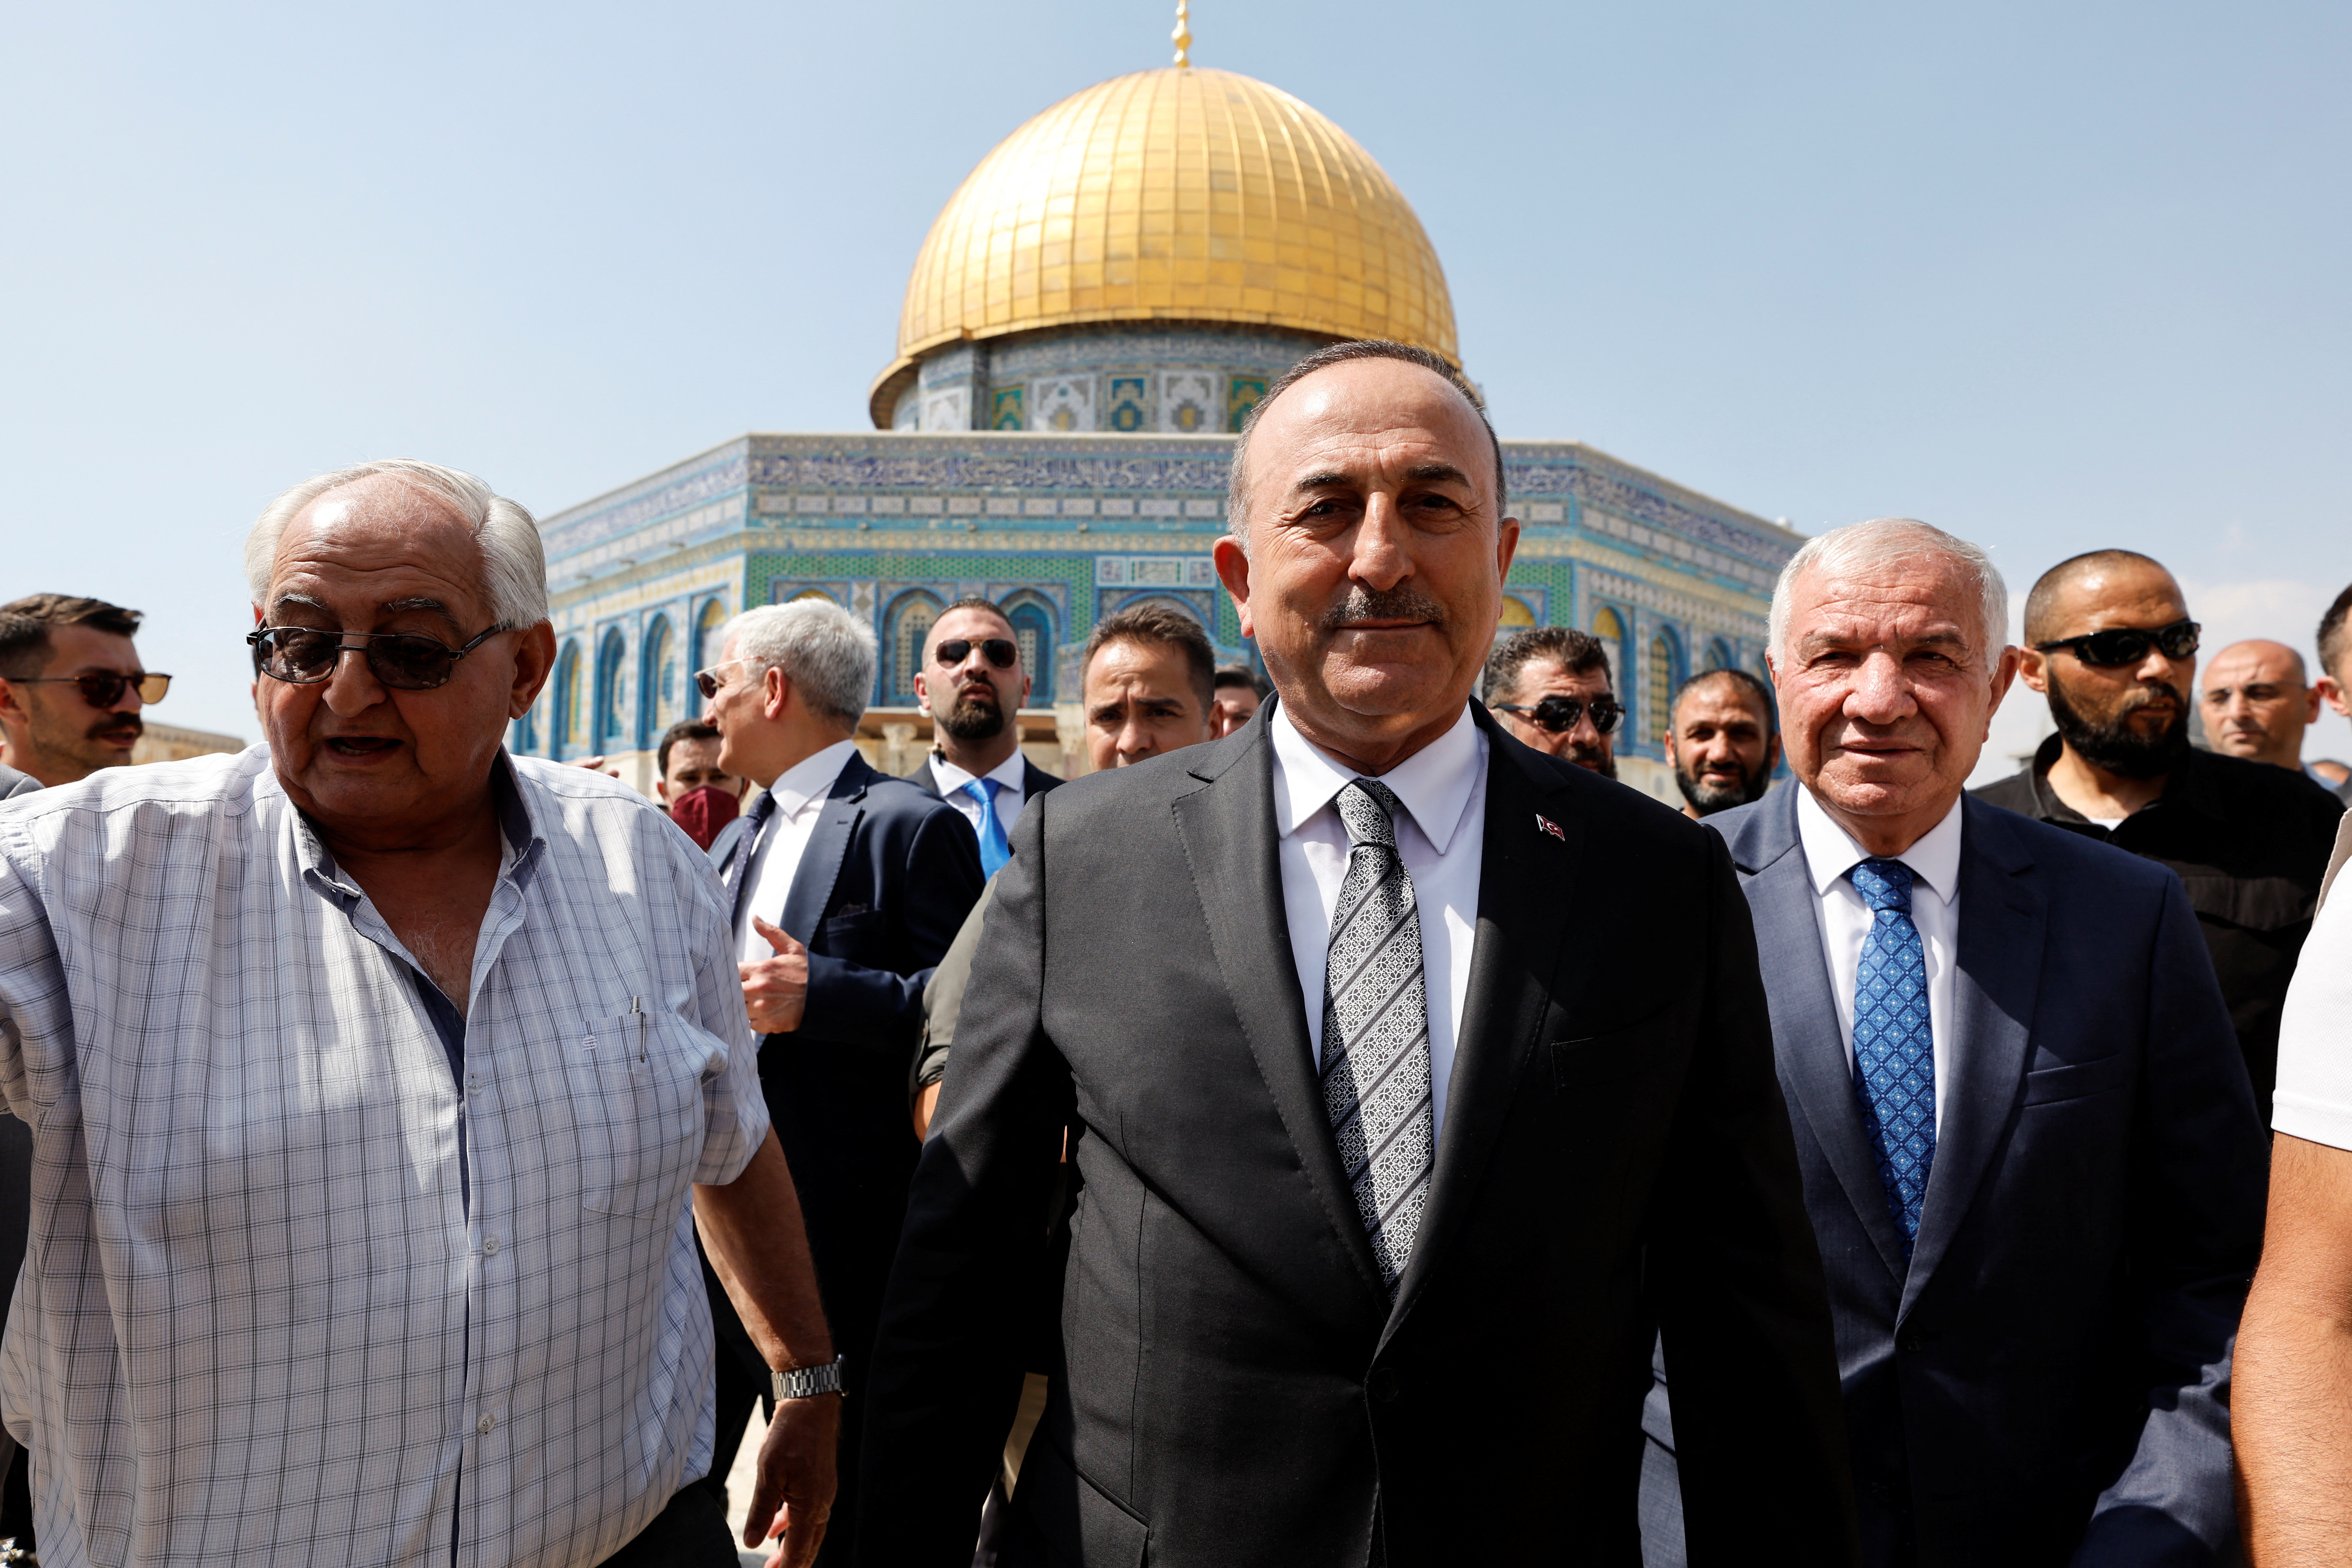 Turkish Foreign Minister Mevlut Cavusoglu visits the compound that houses Al-Aqsa Mosque, known to Muslims as Noble Sanctuary and to Jews as Temple Mount, in Jerusalem's Old City